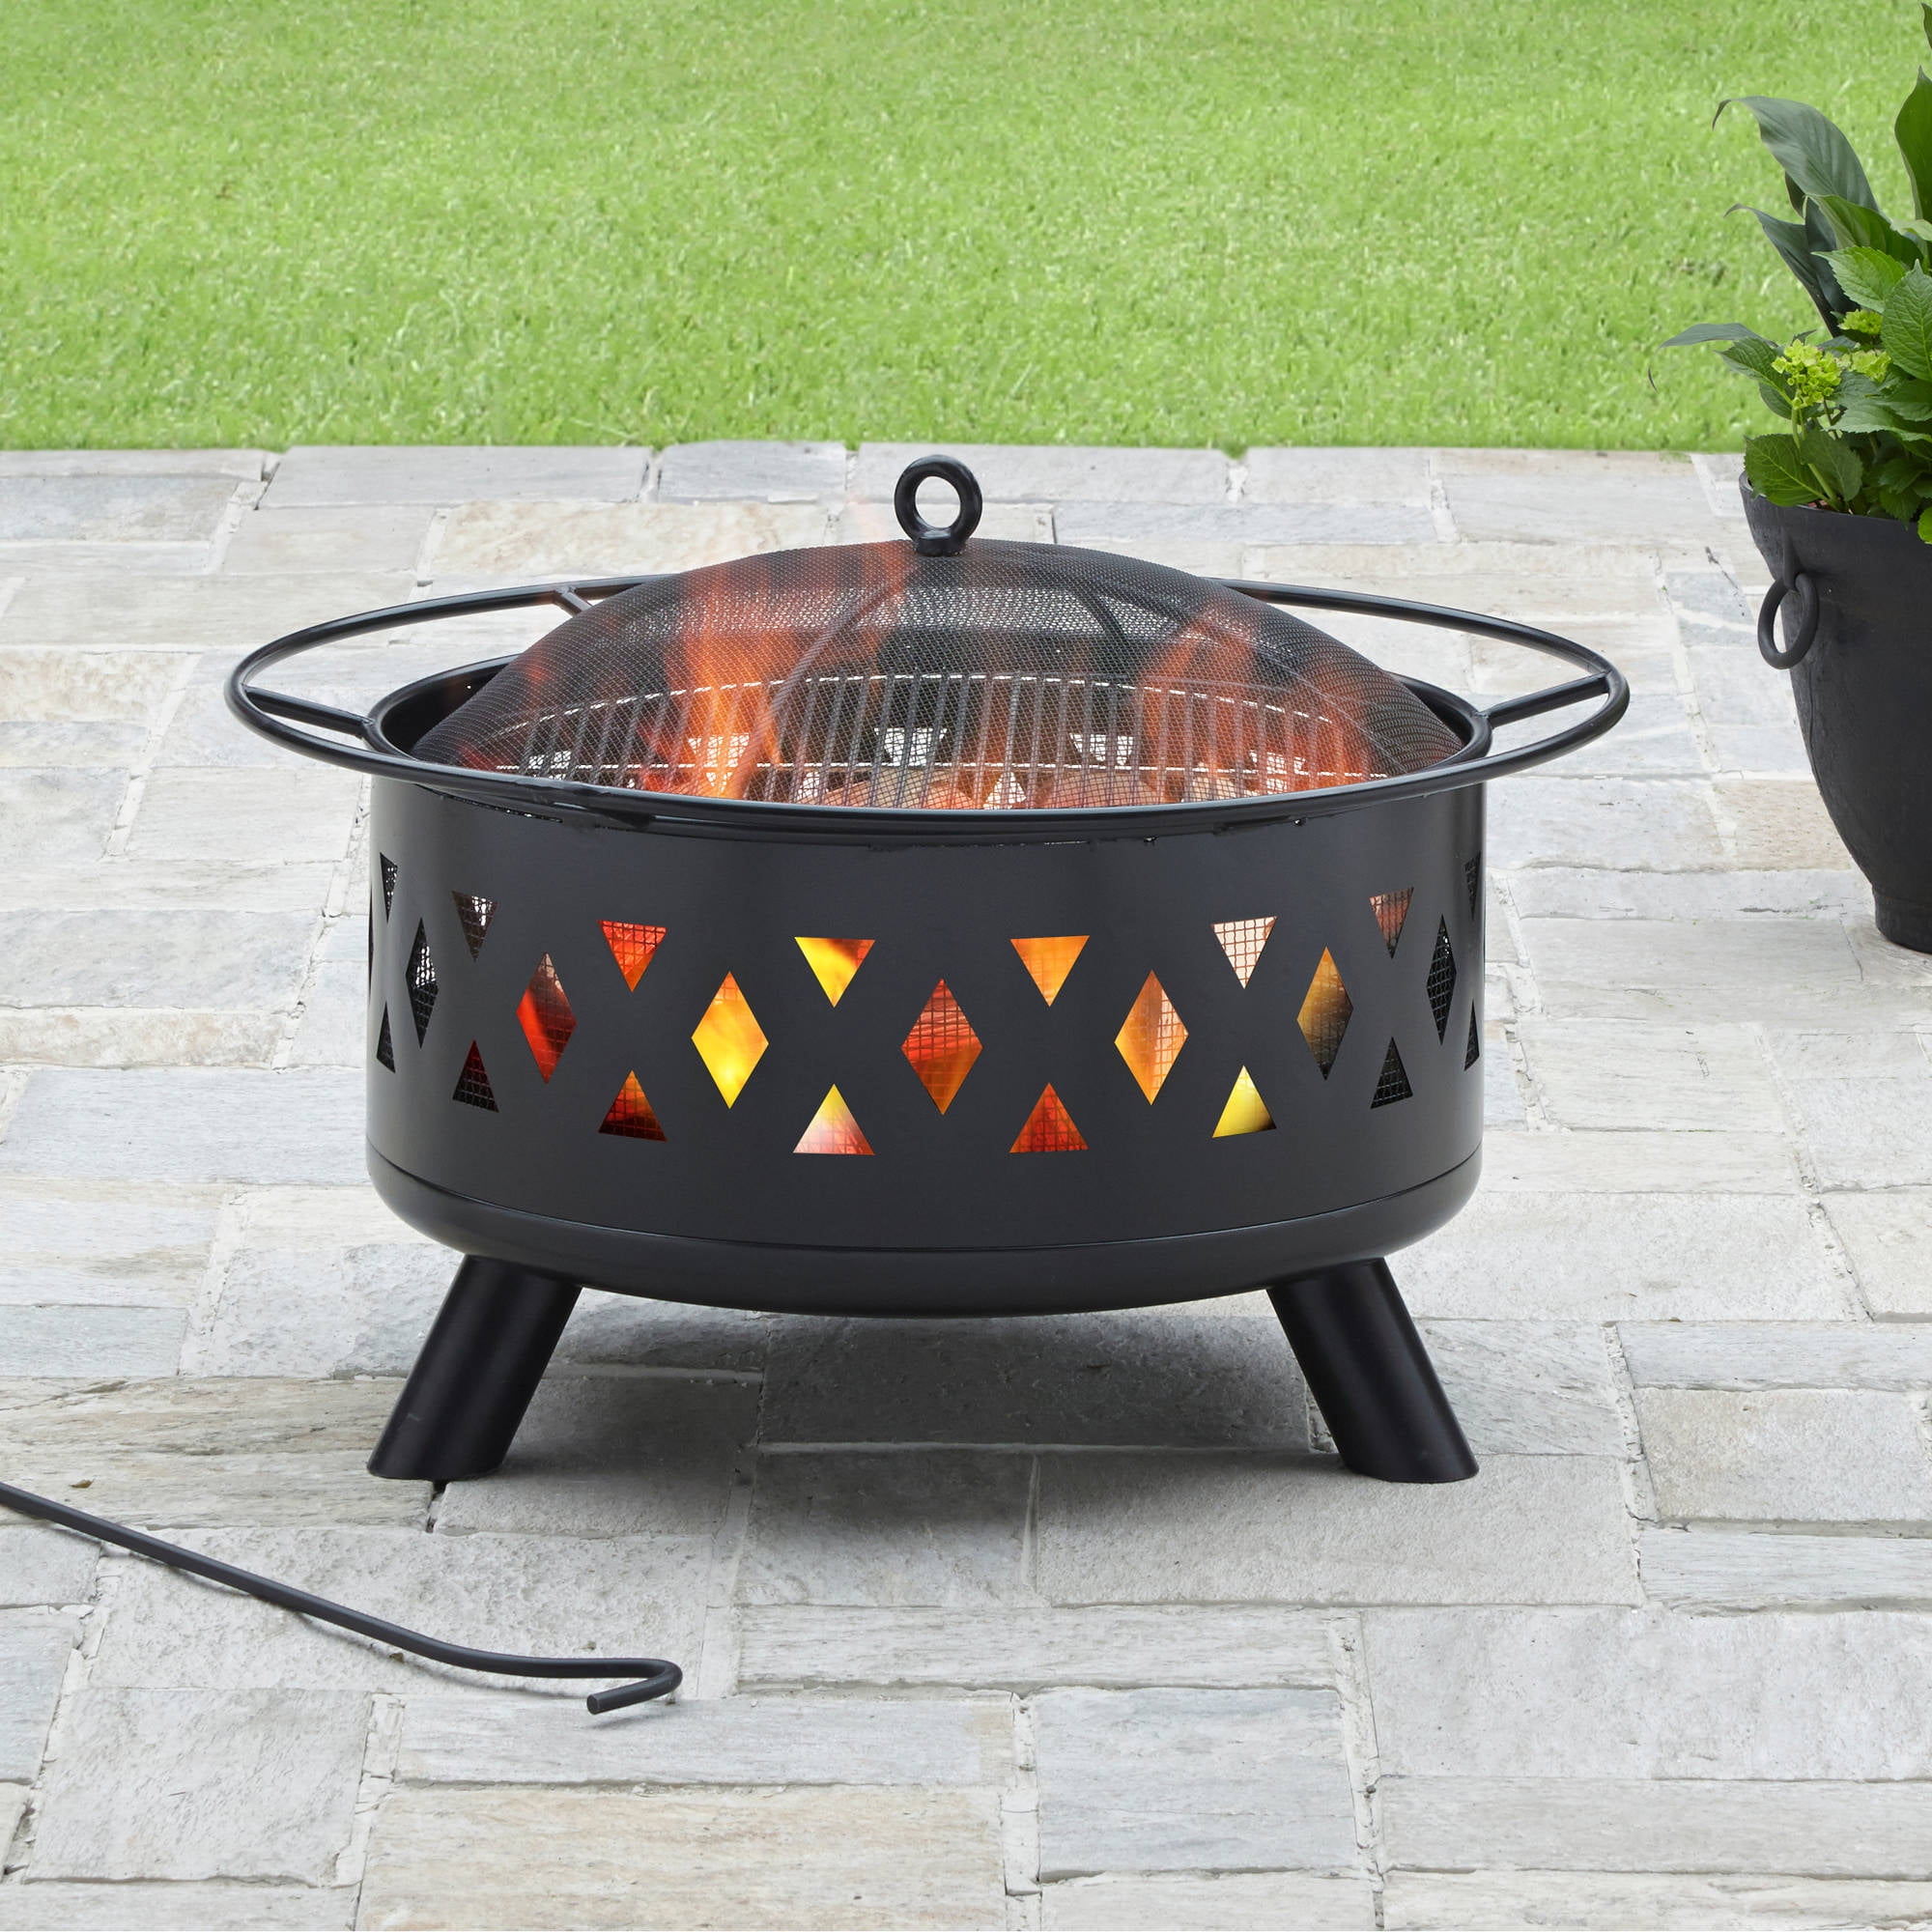 Gardens 30 Inch Round Wood Fire Pit, 30 Inch Outdoor Fire Pit